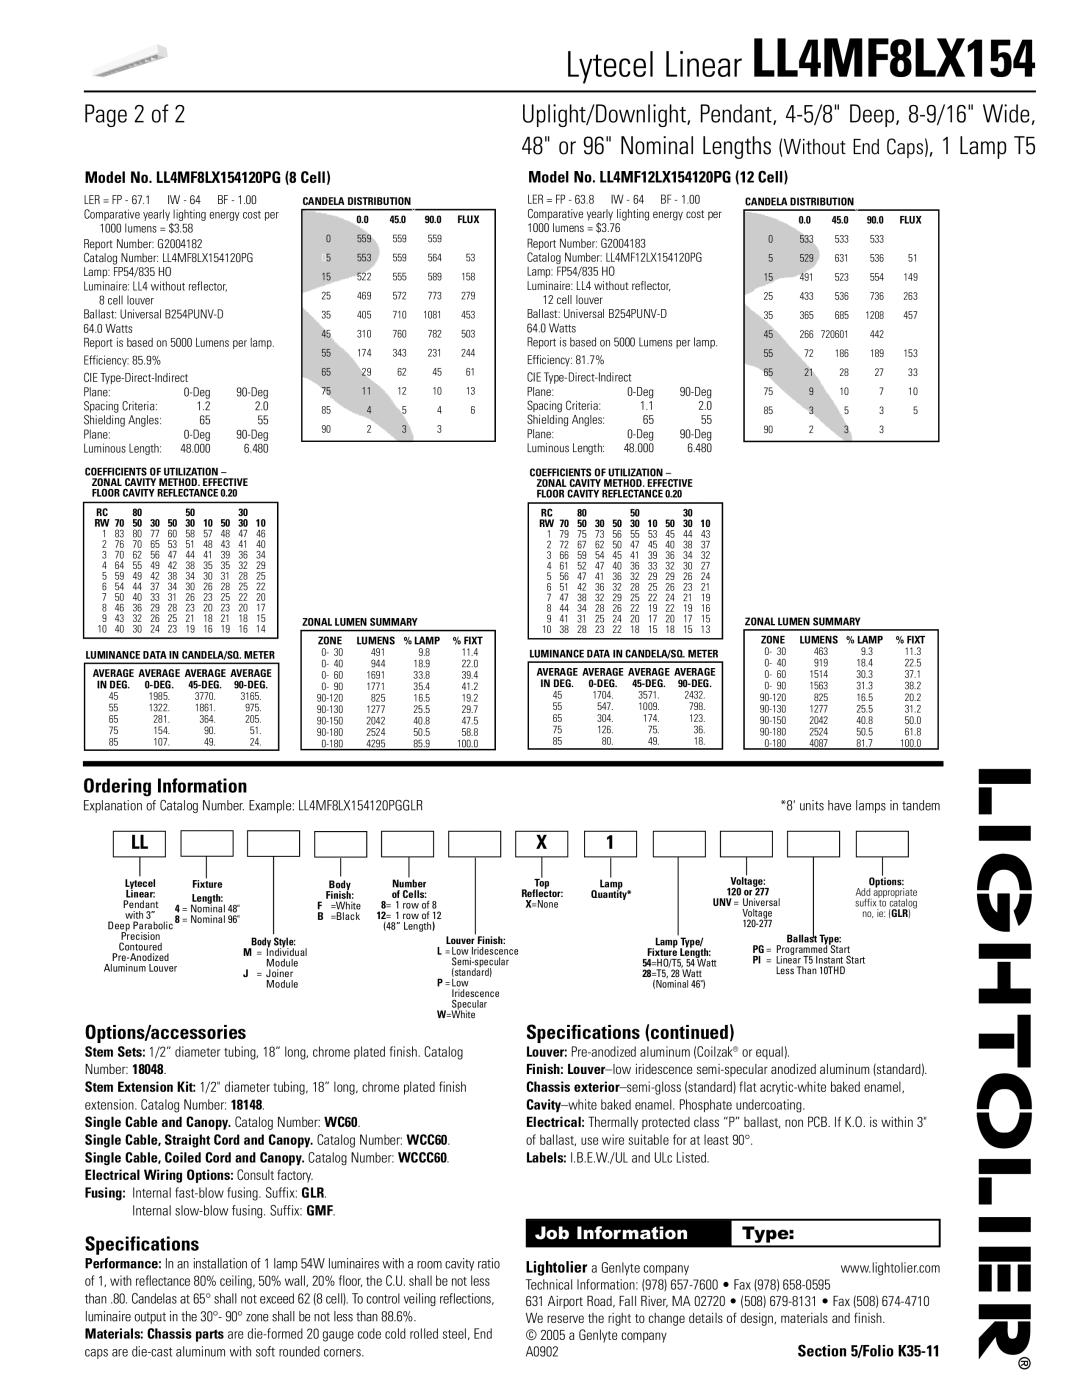 Lightolier LL4MF8LX154 Page 2 of, Ordering Information, Options/accessories, Specifications continued, Job Information 